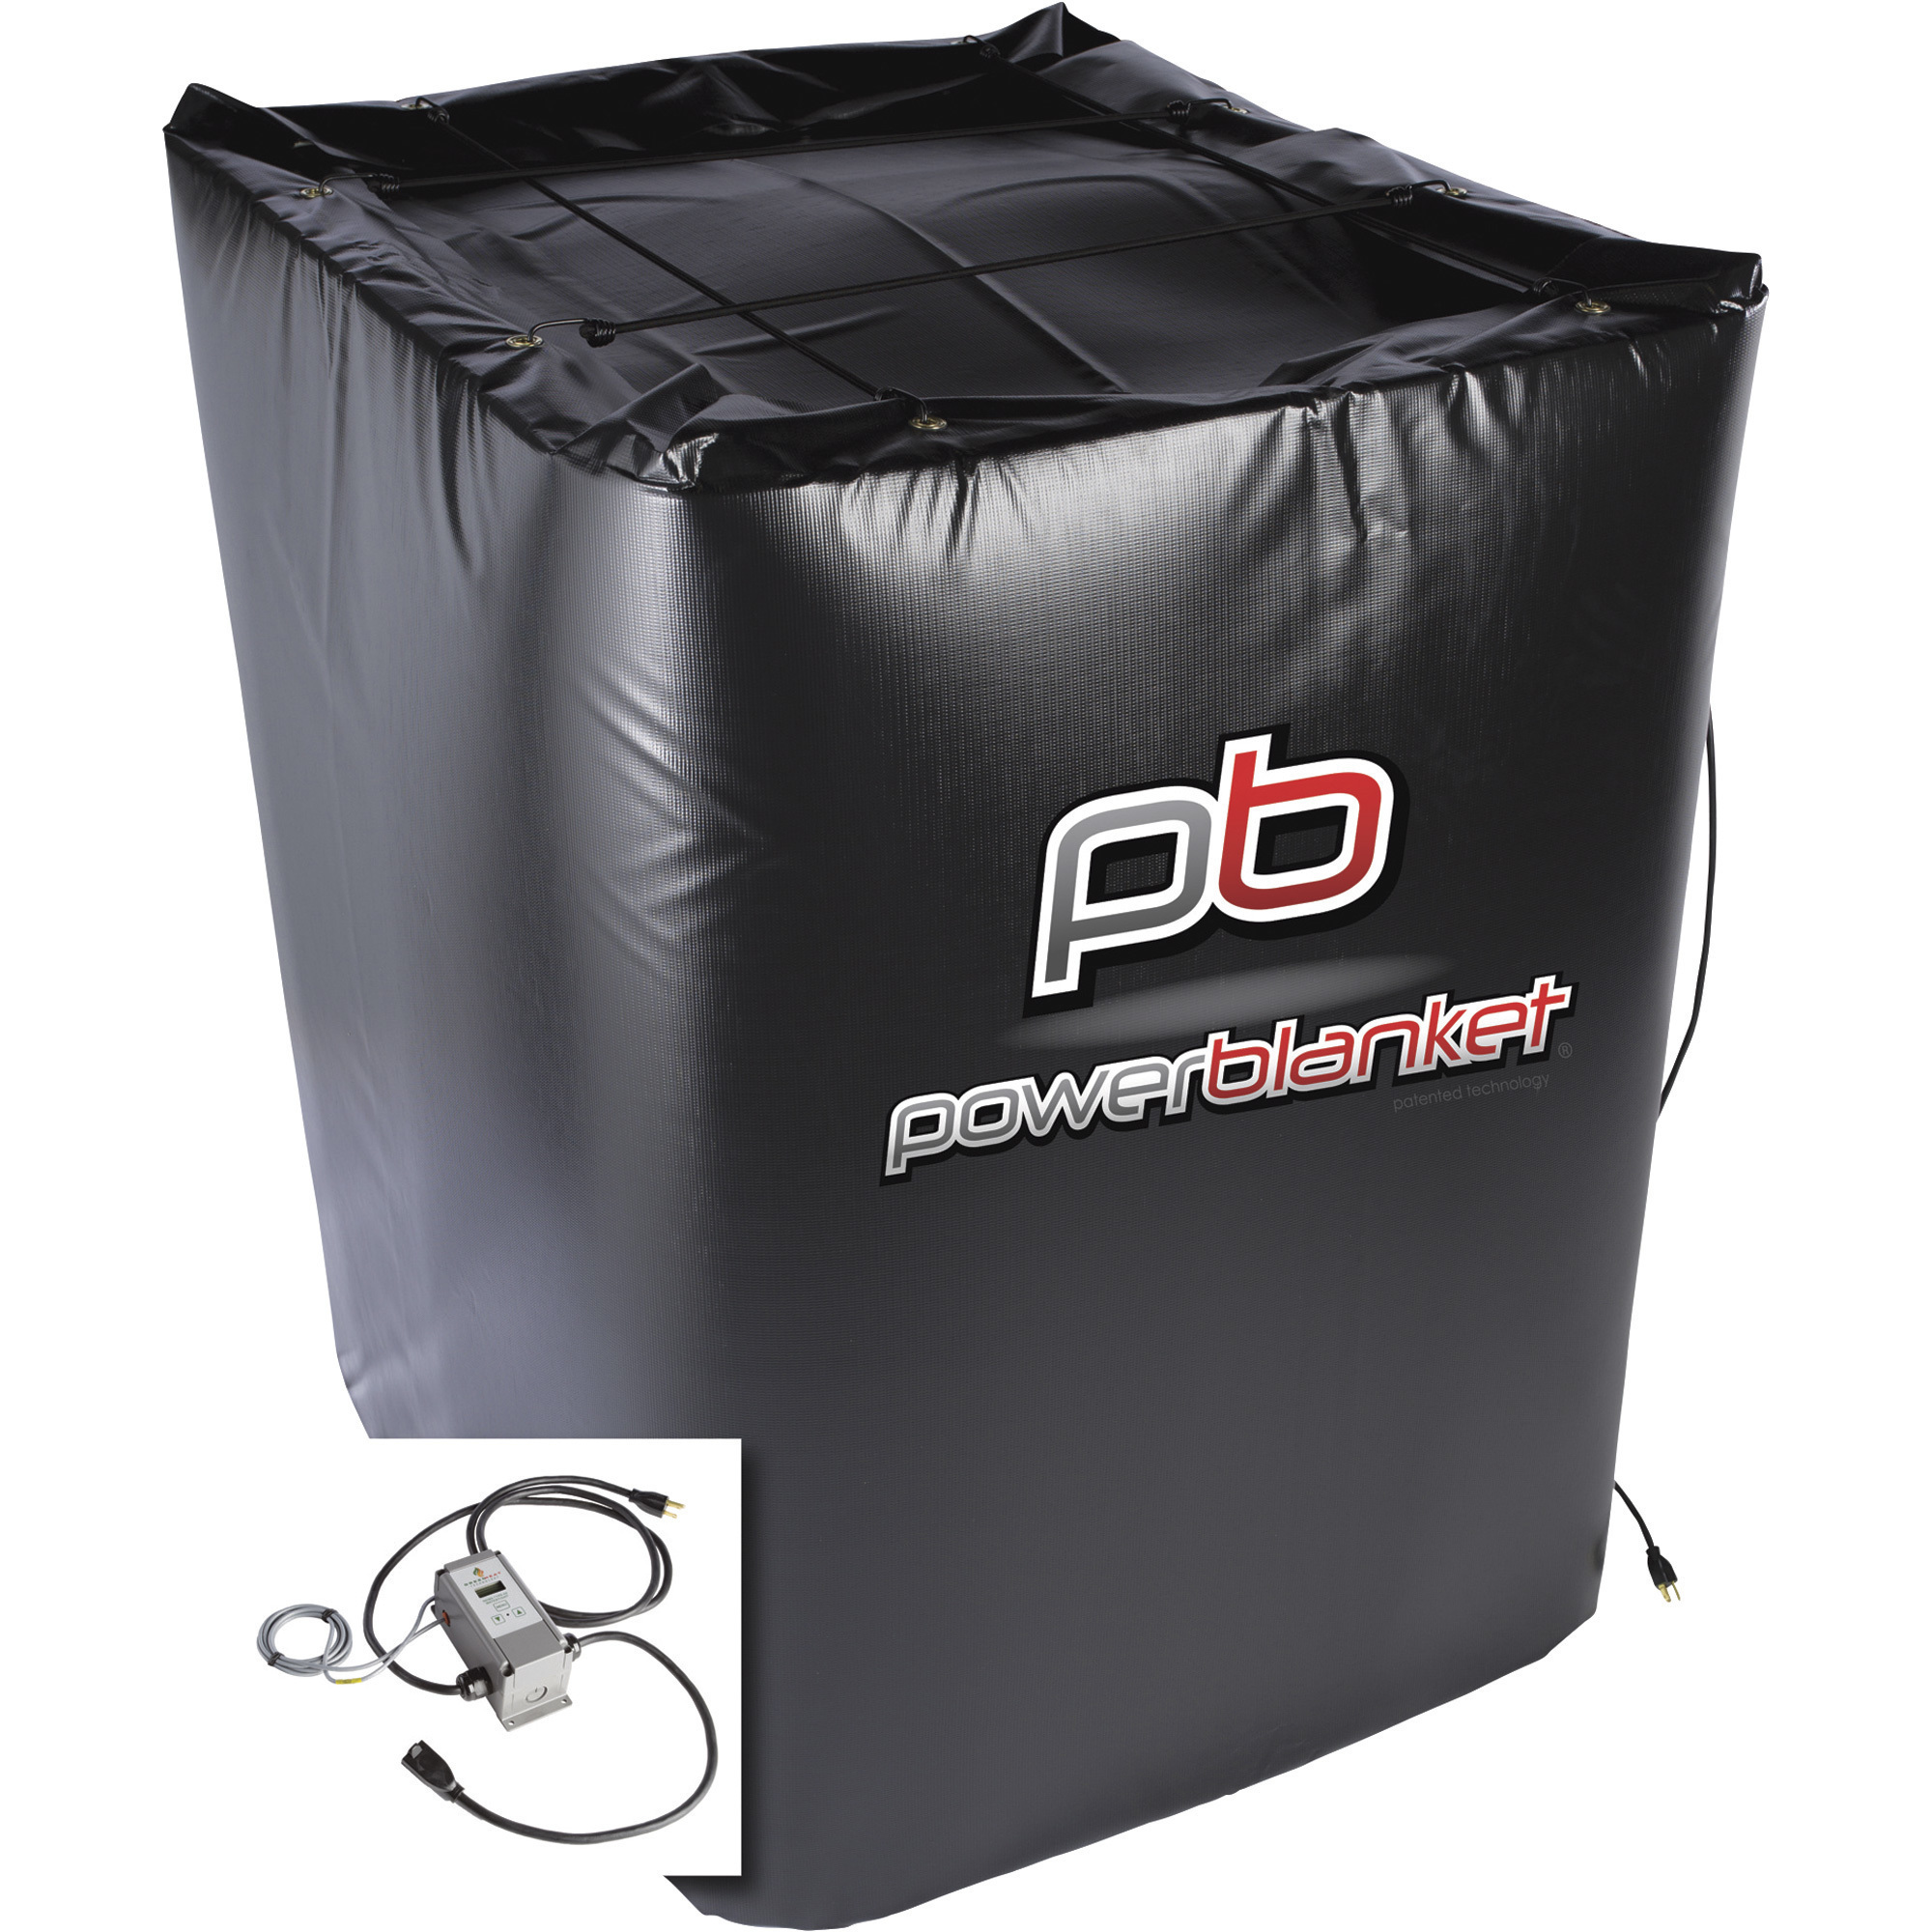 Powerblanket 275-Gallon Insulated Tote Heater, Includes Adjustable Thermostatic Controller, 1,440 Watt, 120 Volt, Model TH275